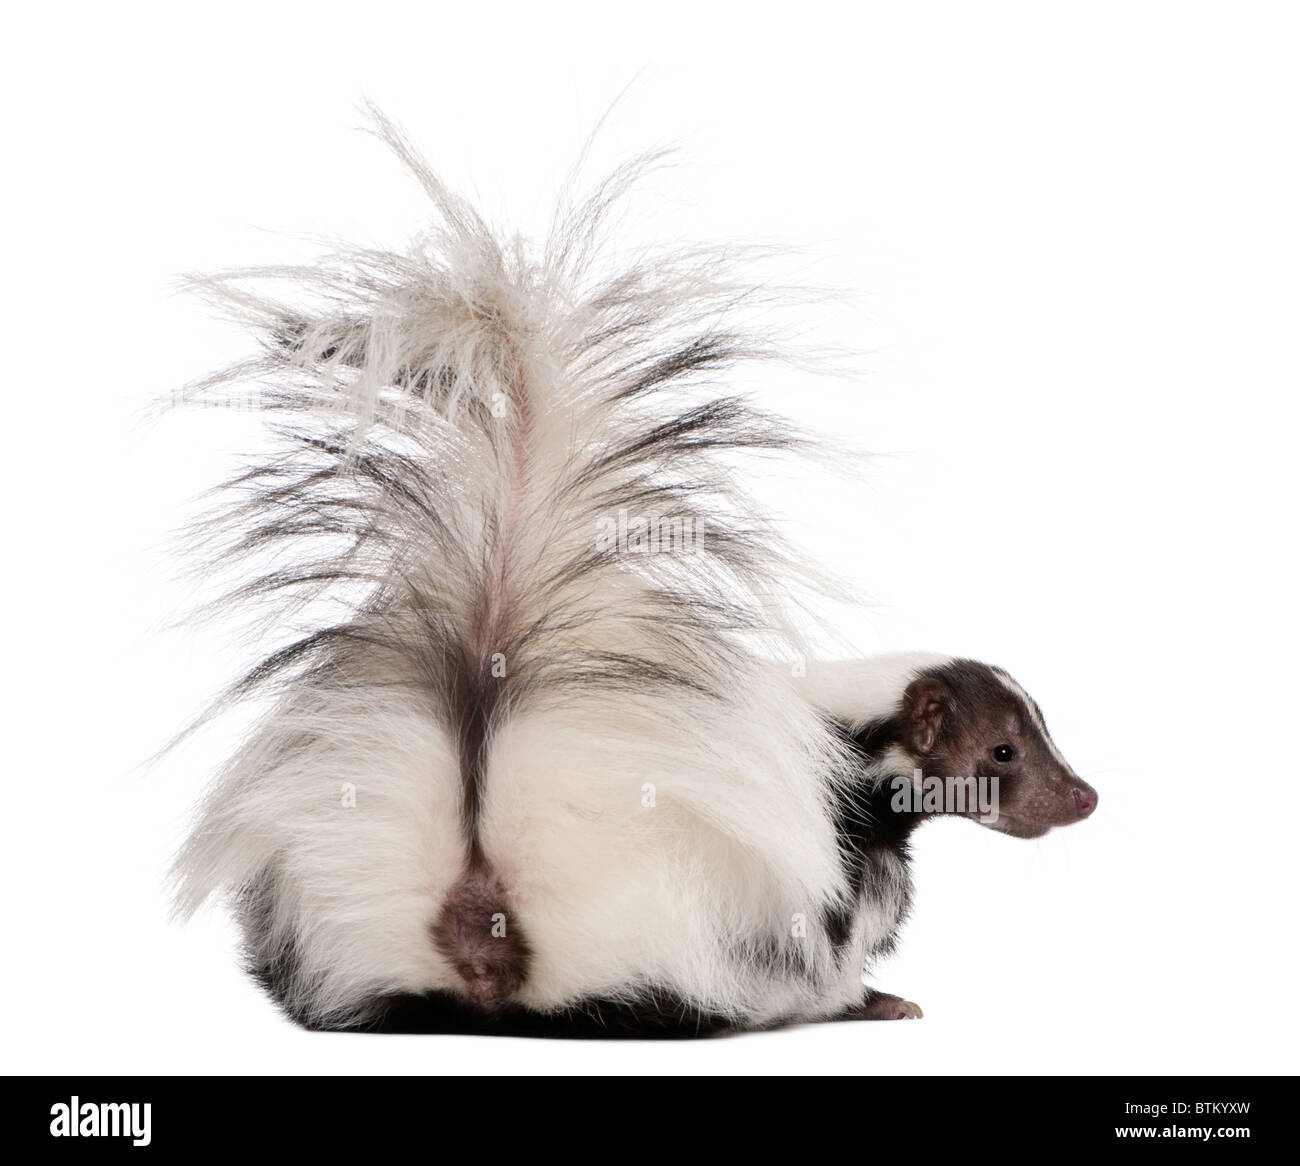 Striped Skunk, Mephitis Mephitis, 5 years old, sitting in front of white background Stock Photo